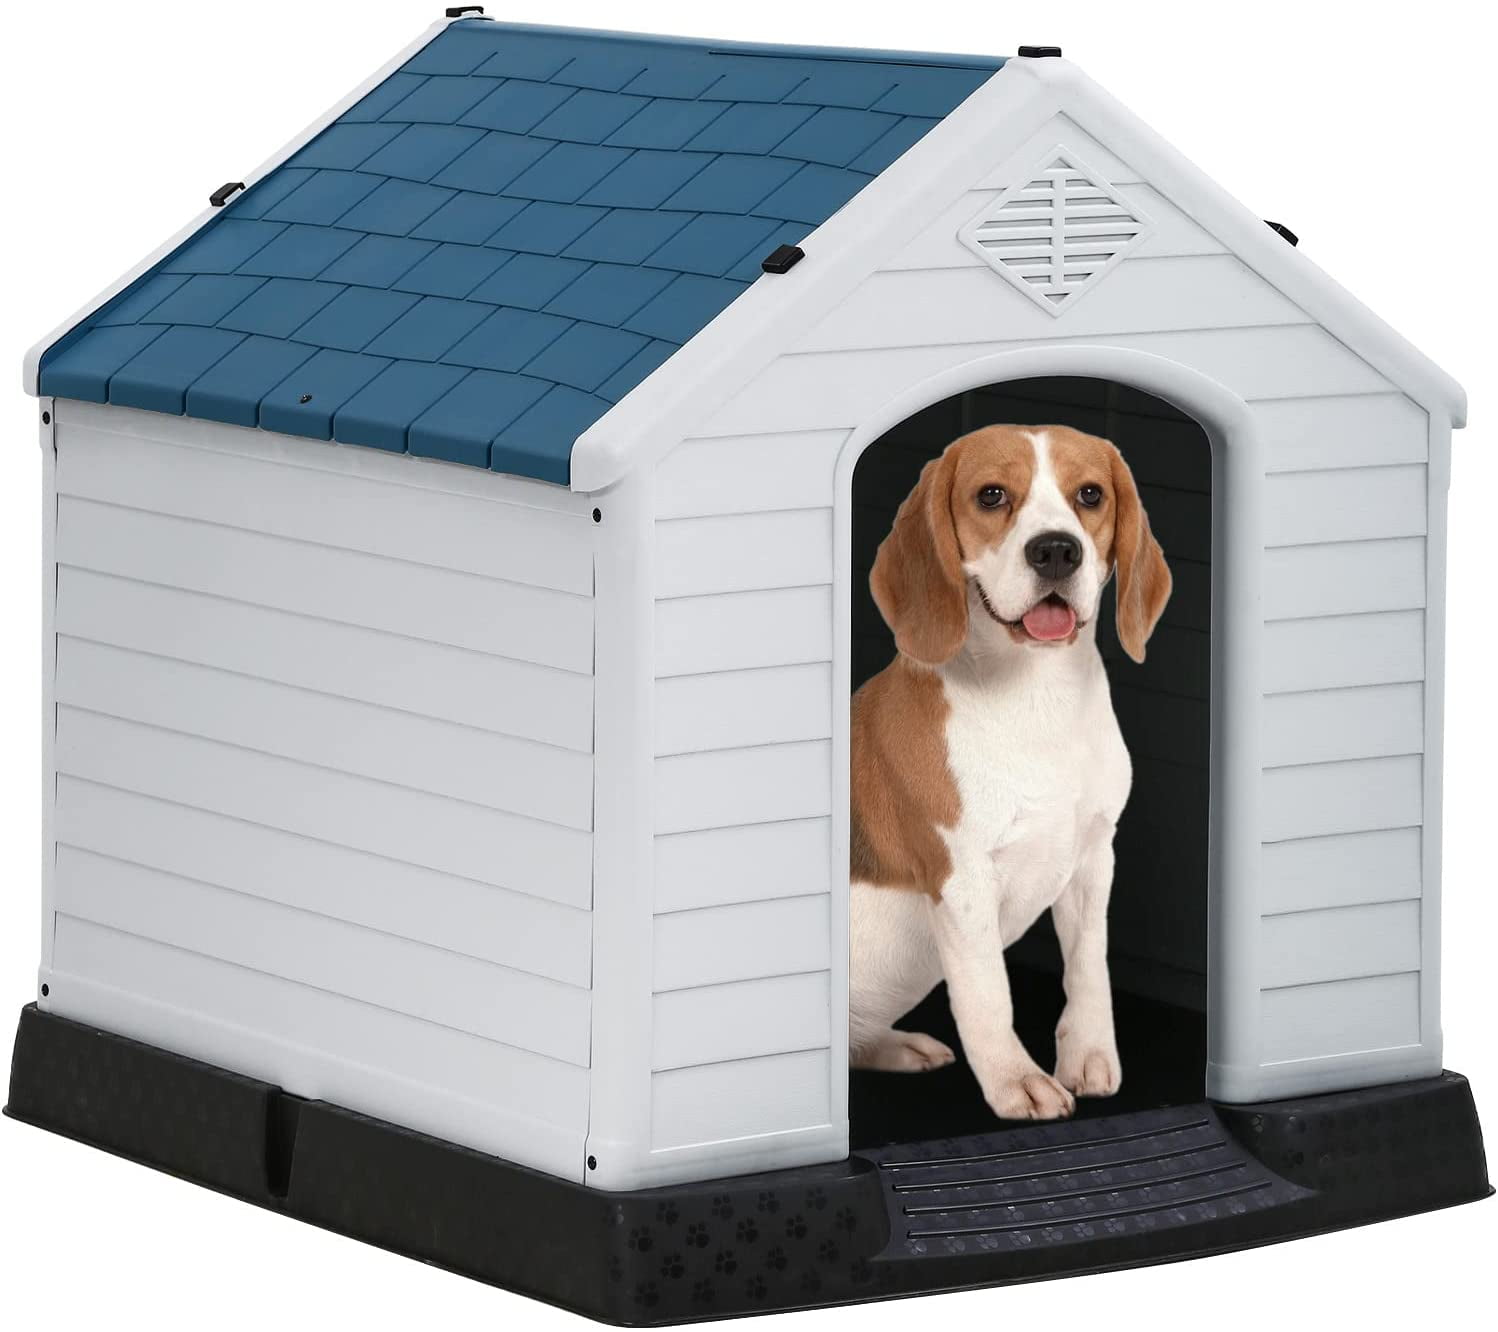 ZenStyle Dog House Large/Medium Pet Kennel Waterproof & Ventilate Shed with Air Vents & Elevated Floor for Outdoor & Indoor 